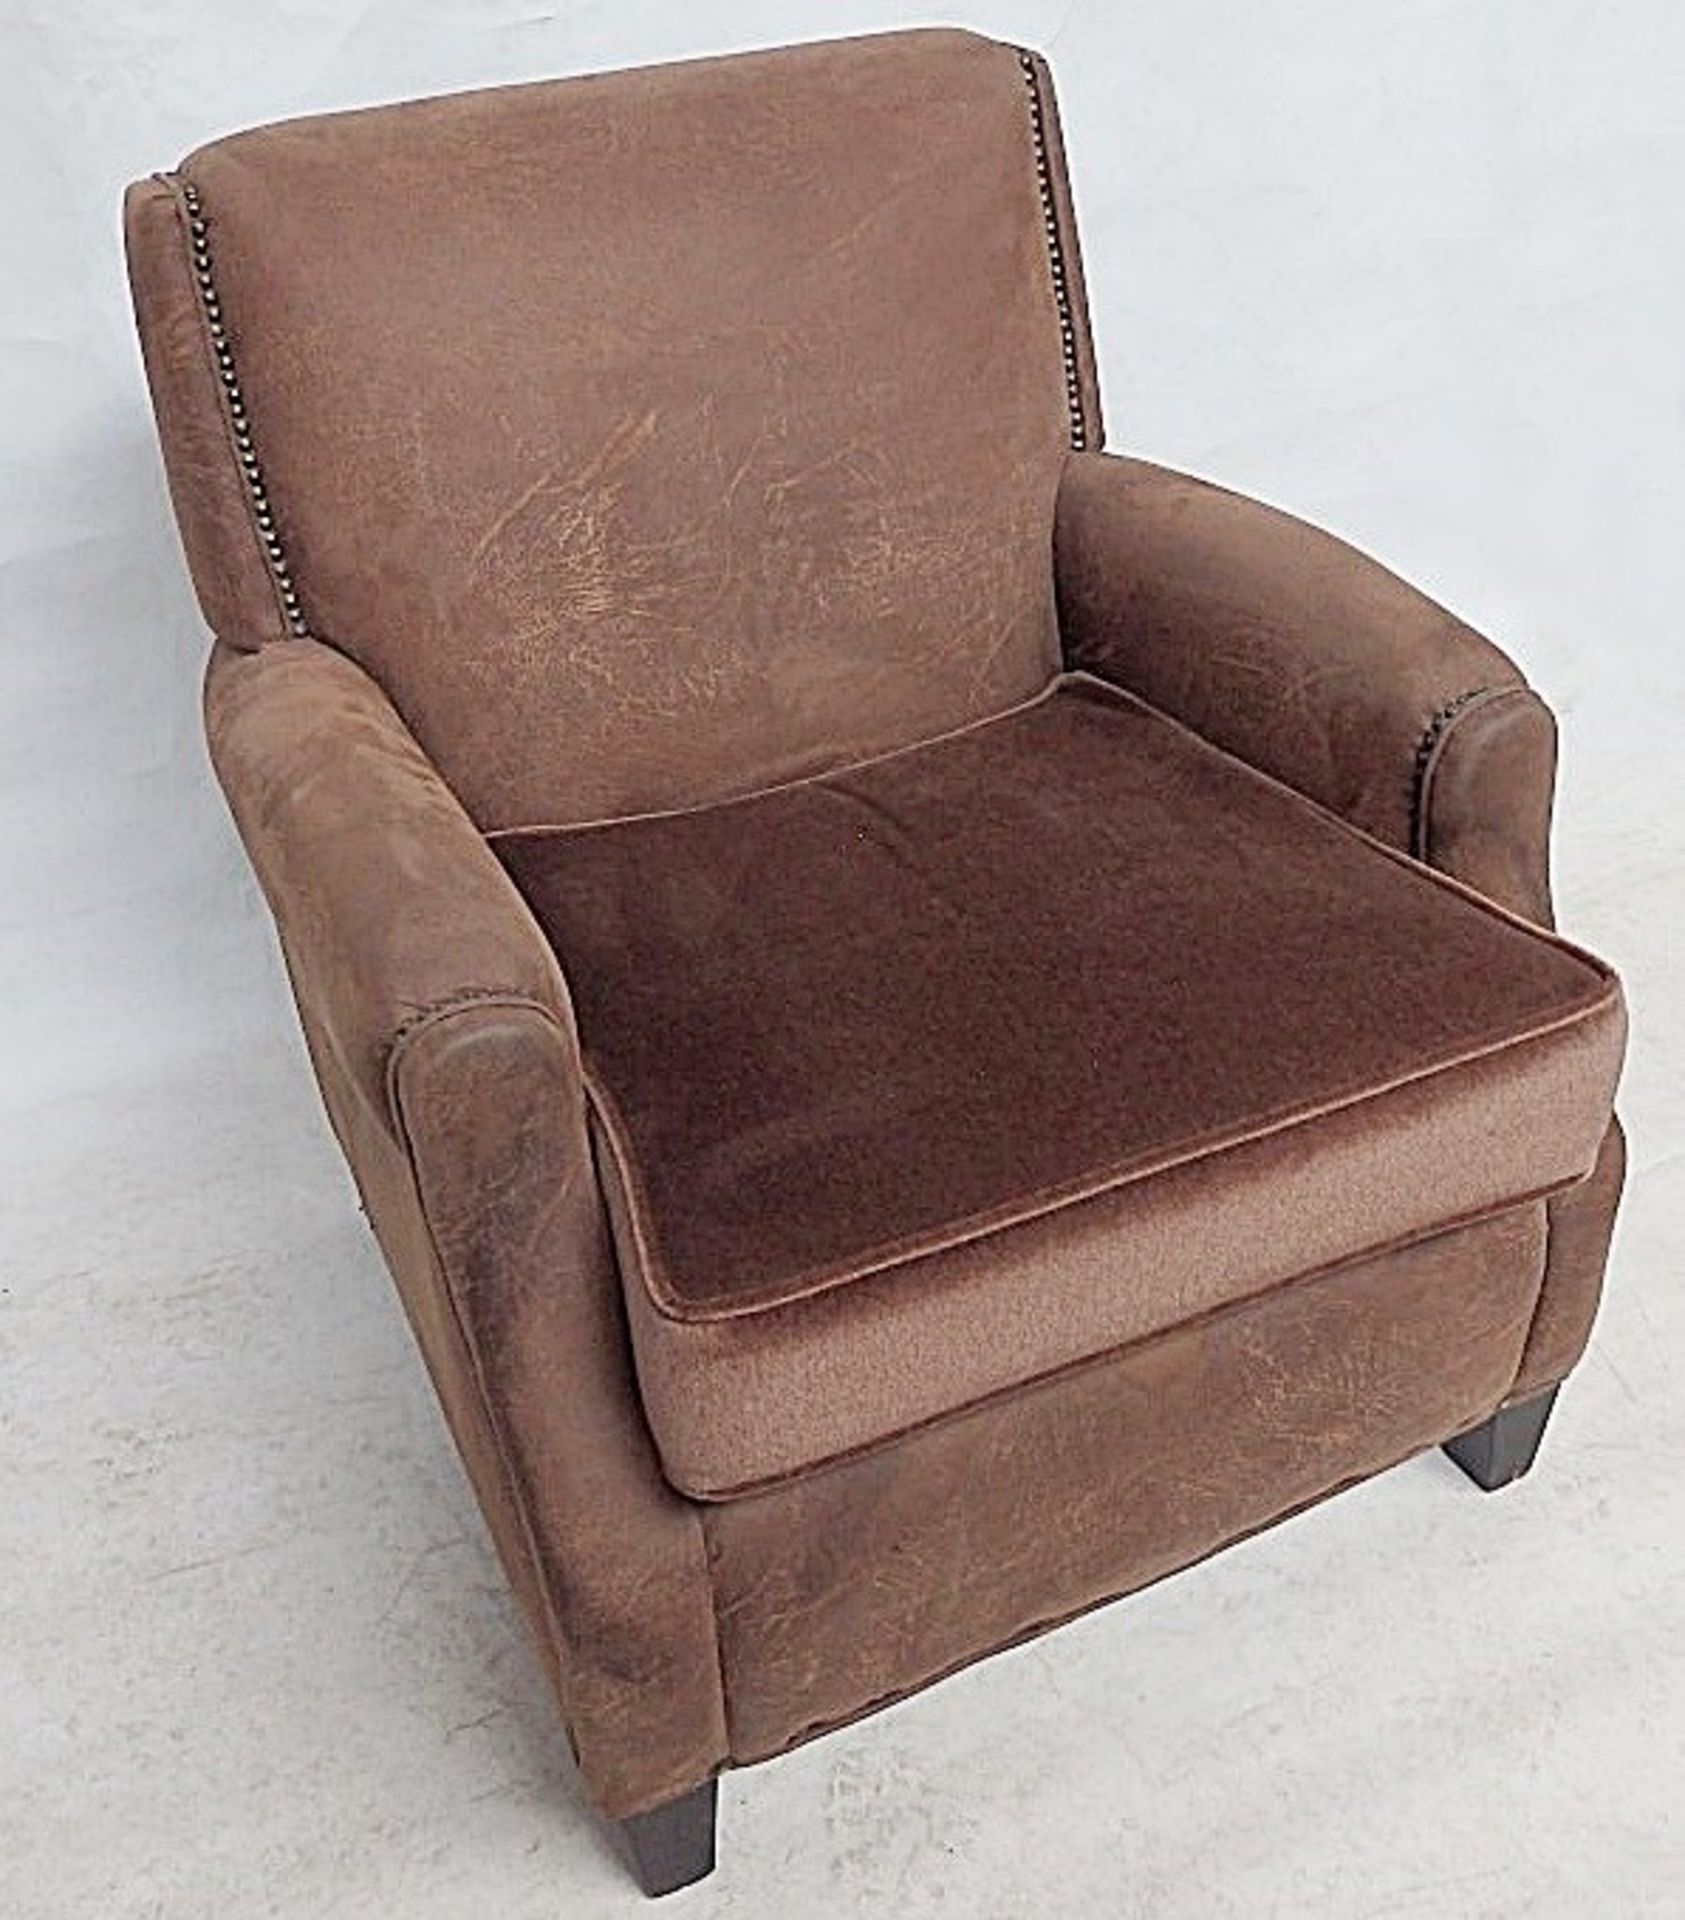 1 x Bespoke Brown Leather & Chenille Armchair - Expertly Built And Upholstered By British - Image 3 of 5